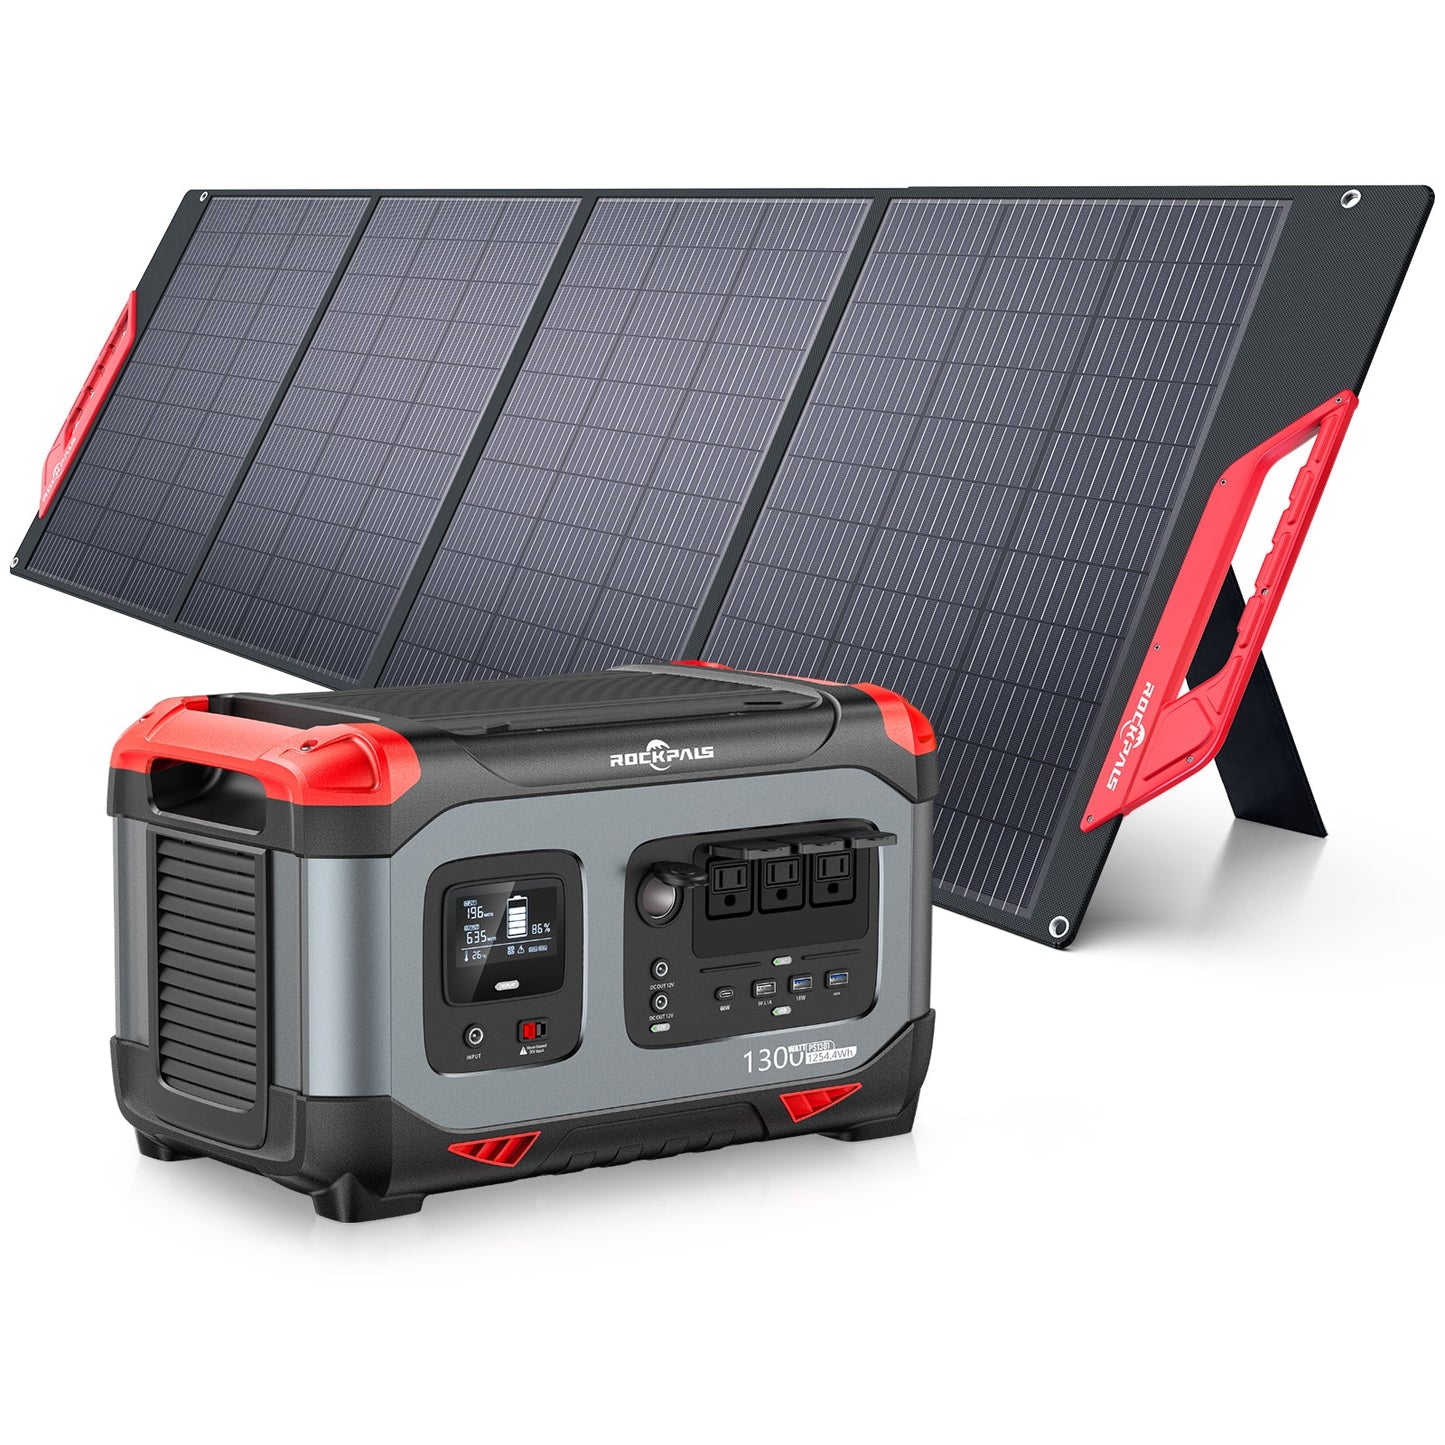 Rockpals Rockpower 1300W Portable Power Station - Solar Generator For Emergency Power Equipment for Outdoor RV/Van Camping, Home Use